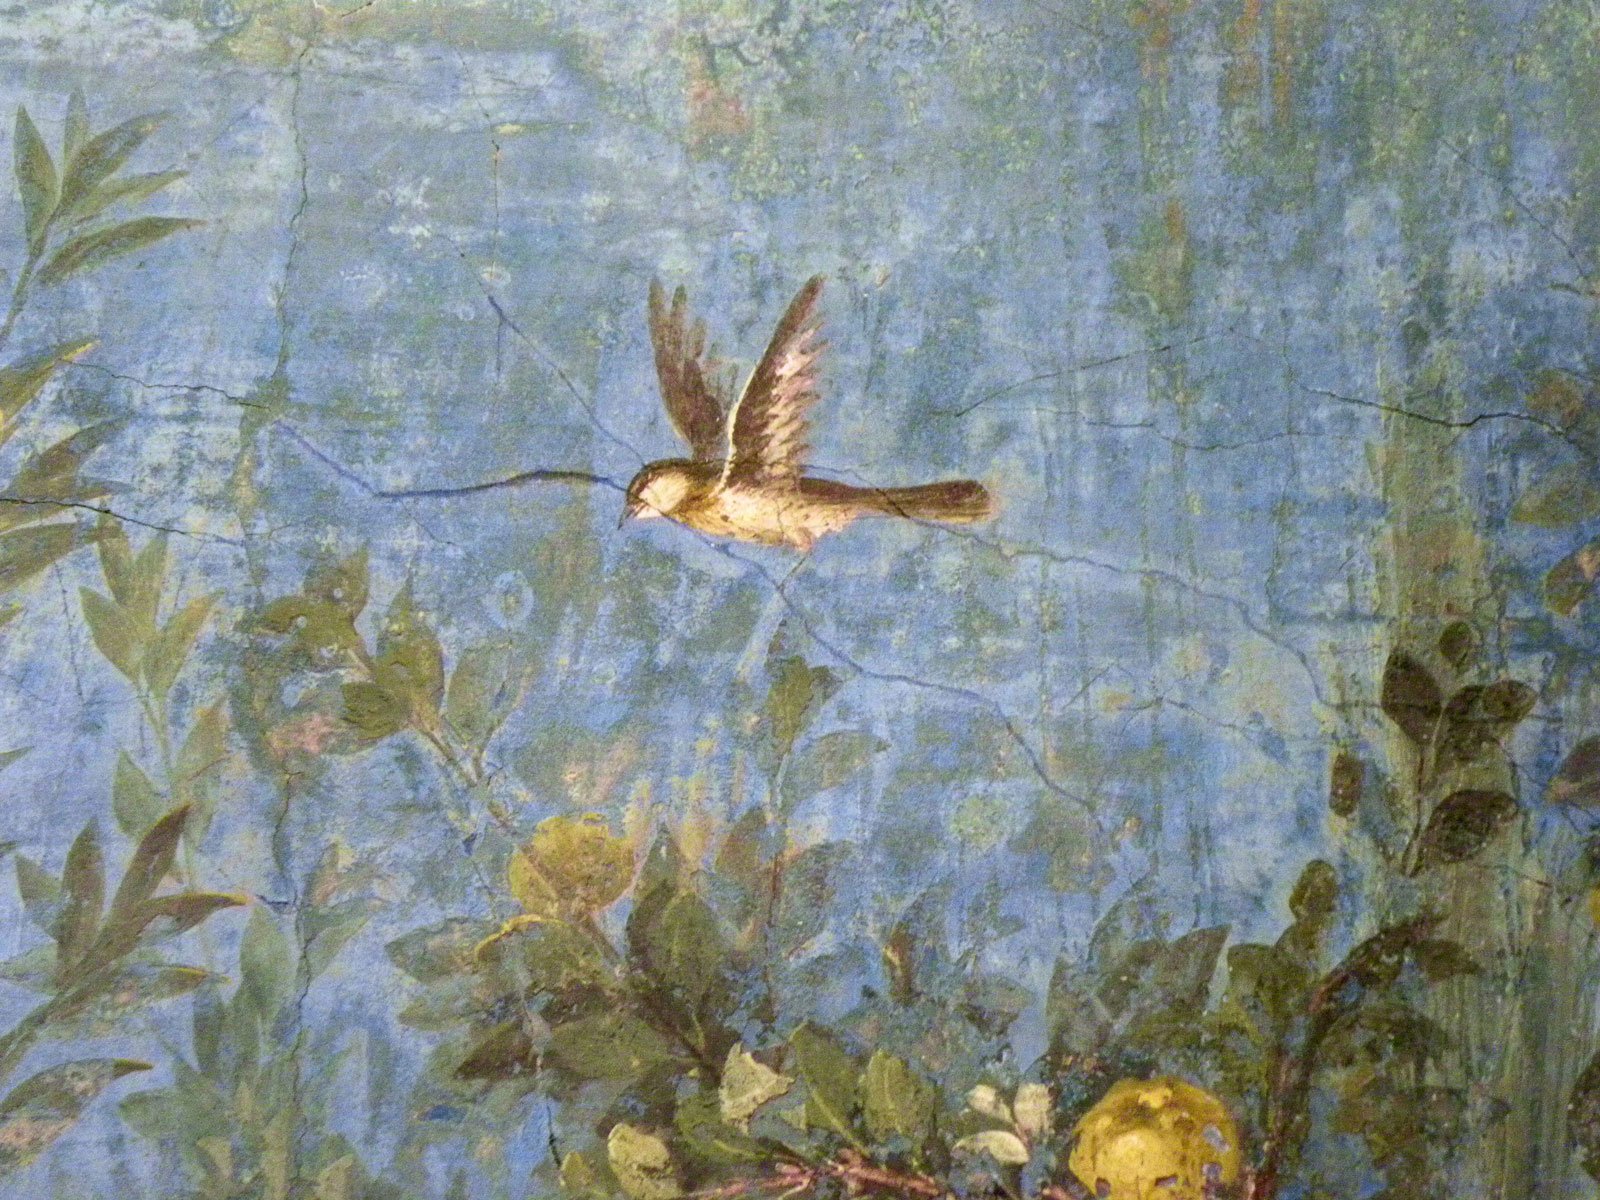 Detail of the first-century frescoes from Livia's garden room, now in Rome's Palazzo Massimo (photo: Ian Scott, Flickr)